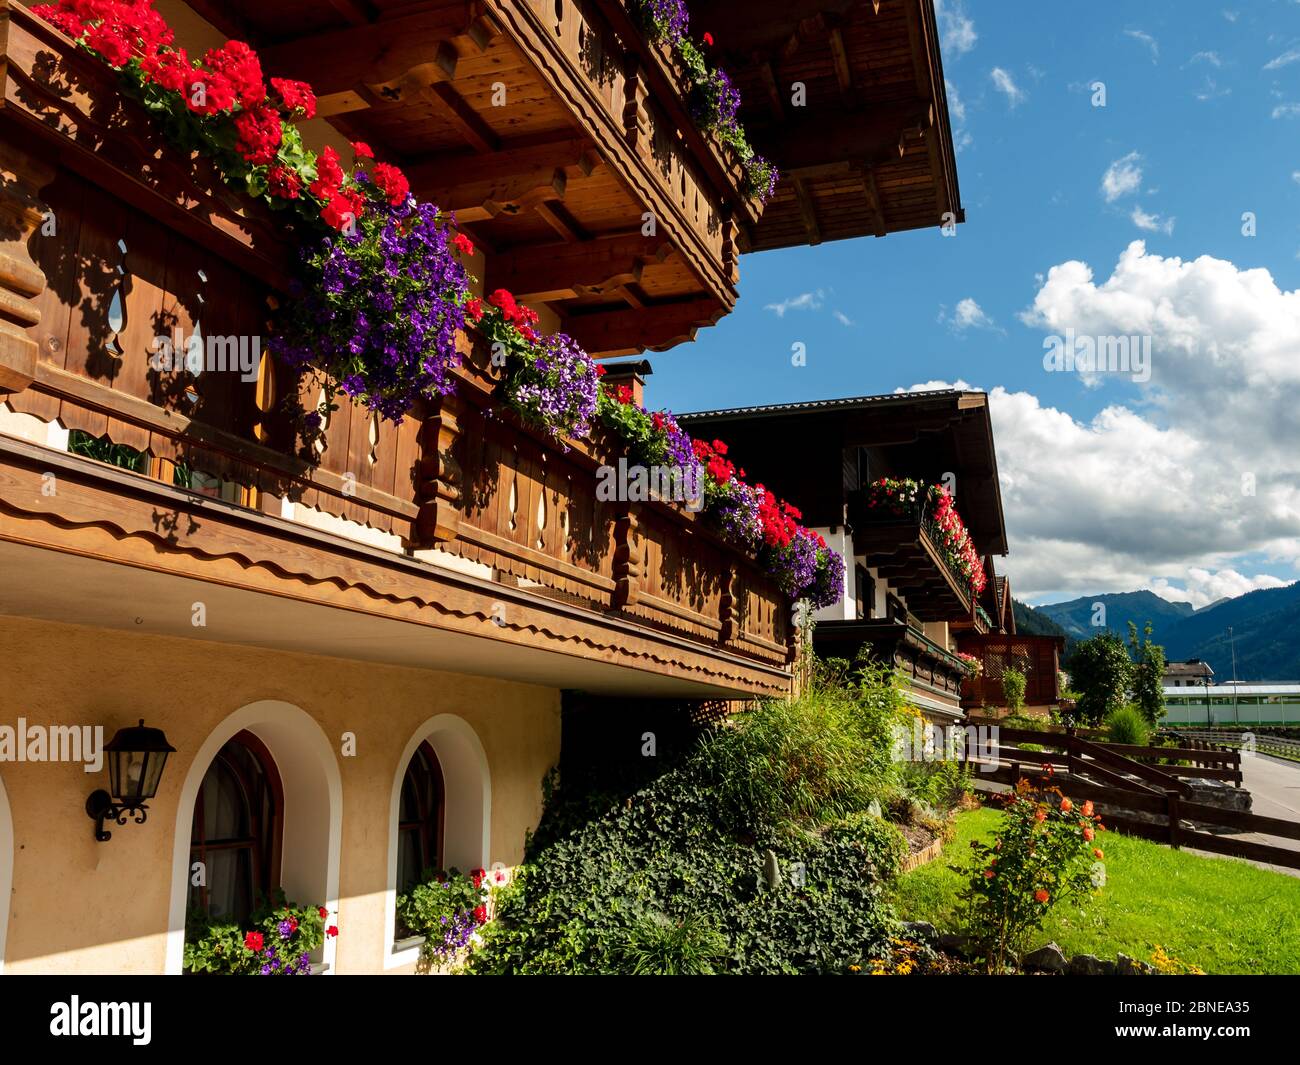 Balconies and terraces decorated with colorful potted flowers in an alpine resort in Austria. Grossarl. Stock Photo